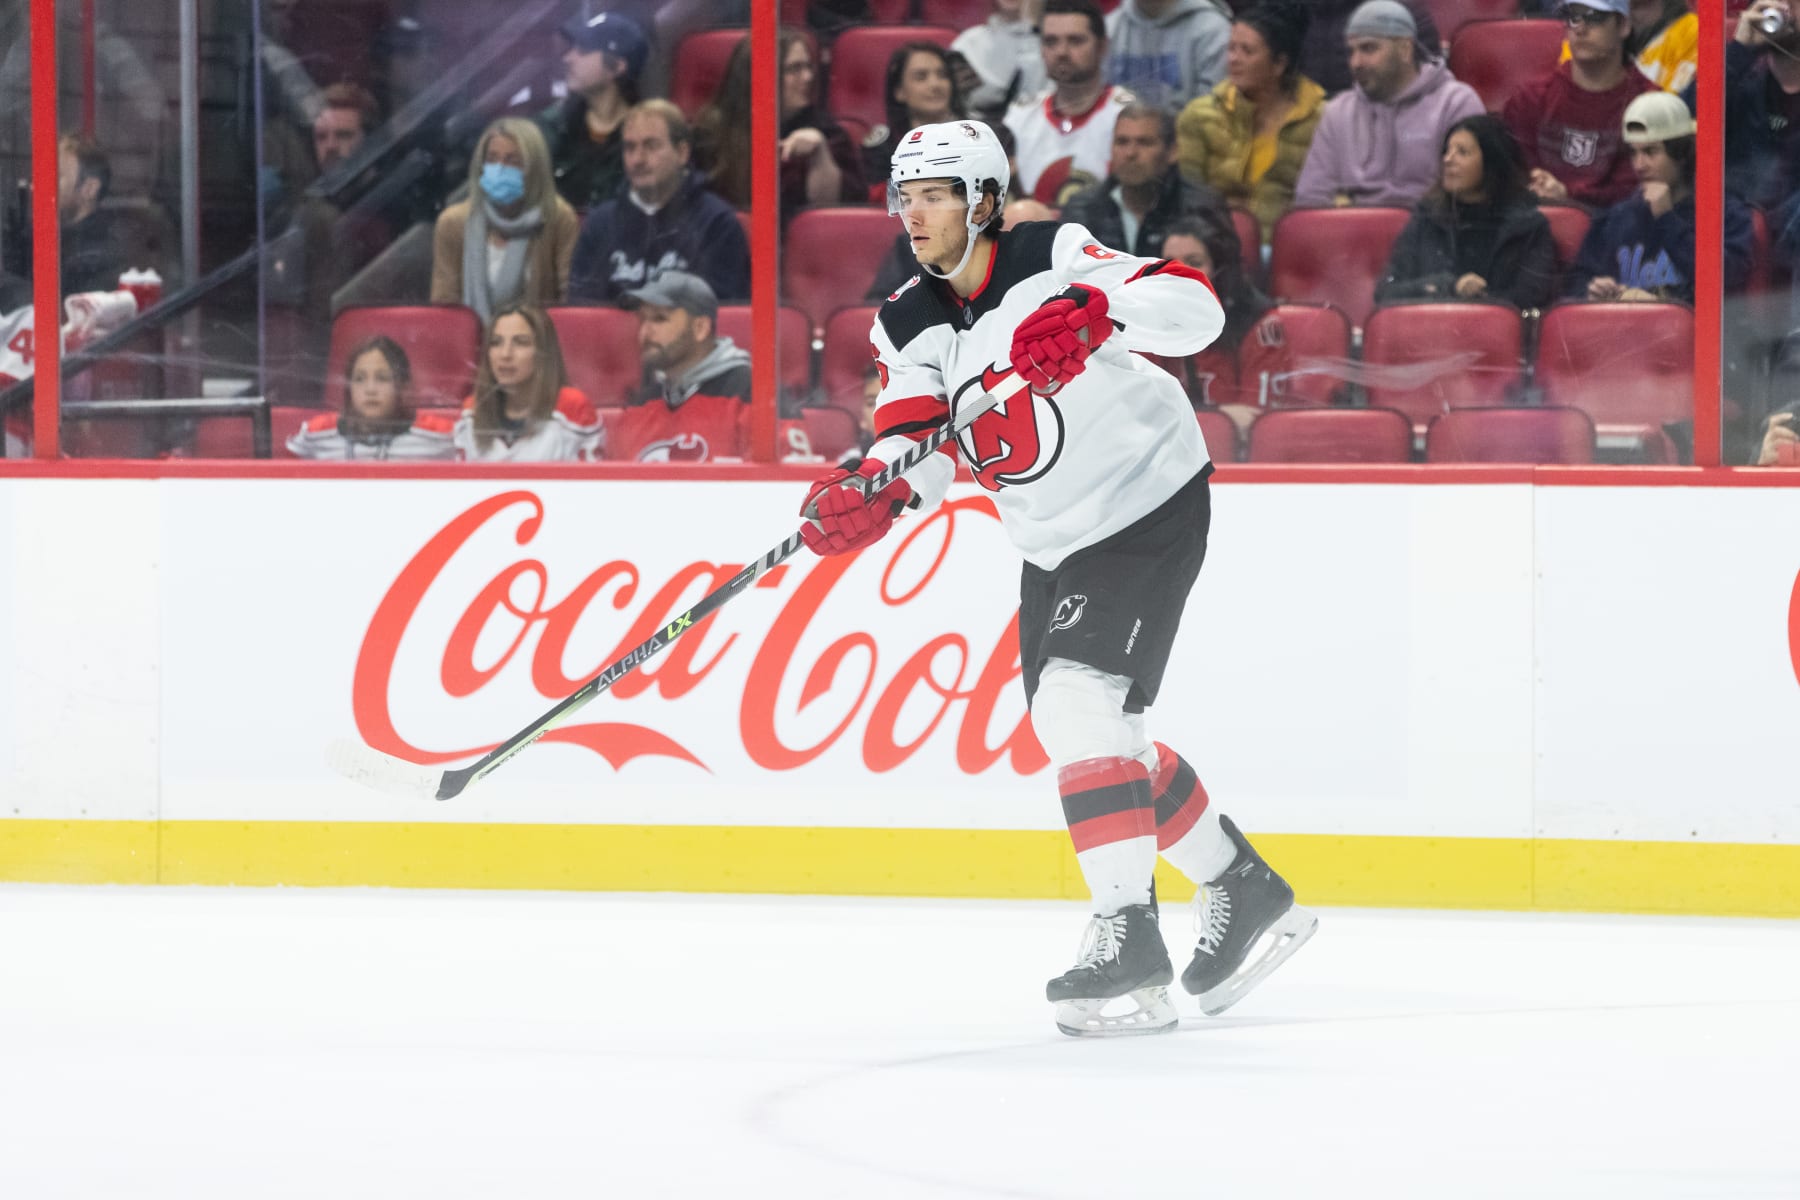 New Jersey Devils re-sign Erik Hauls to three-year deal